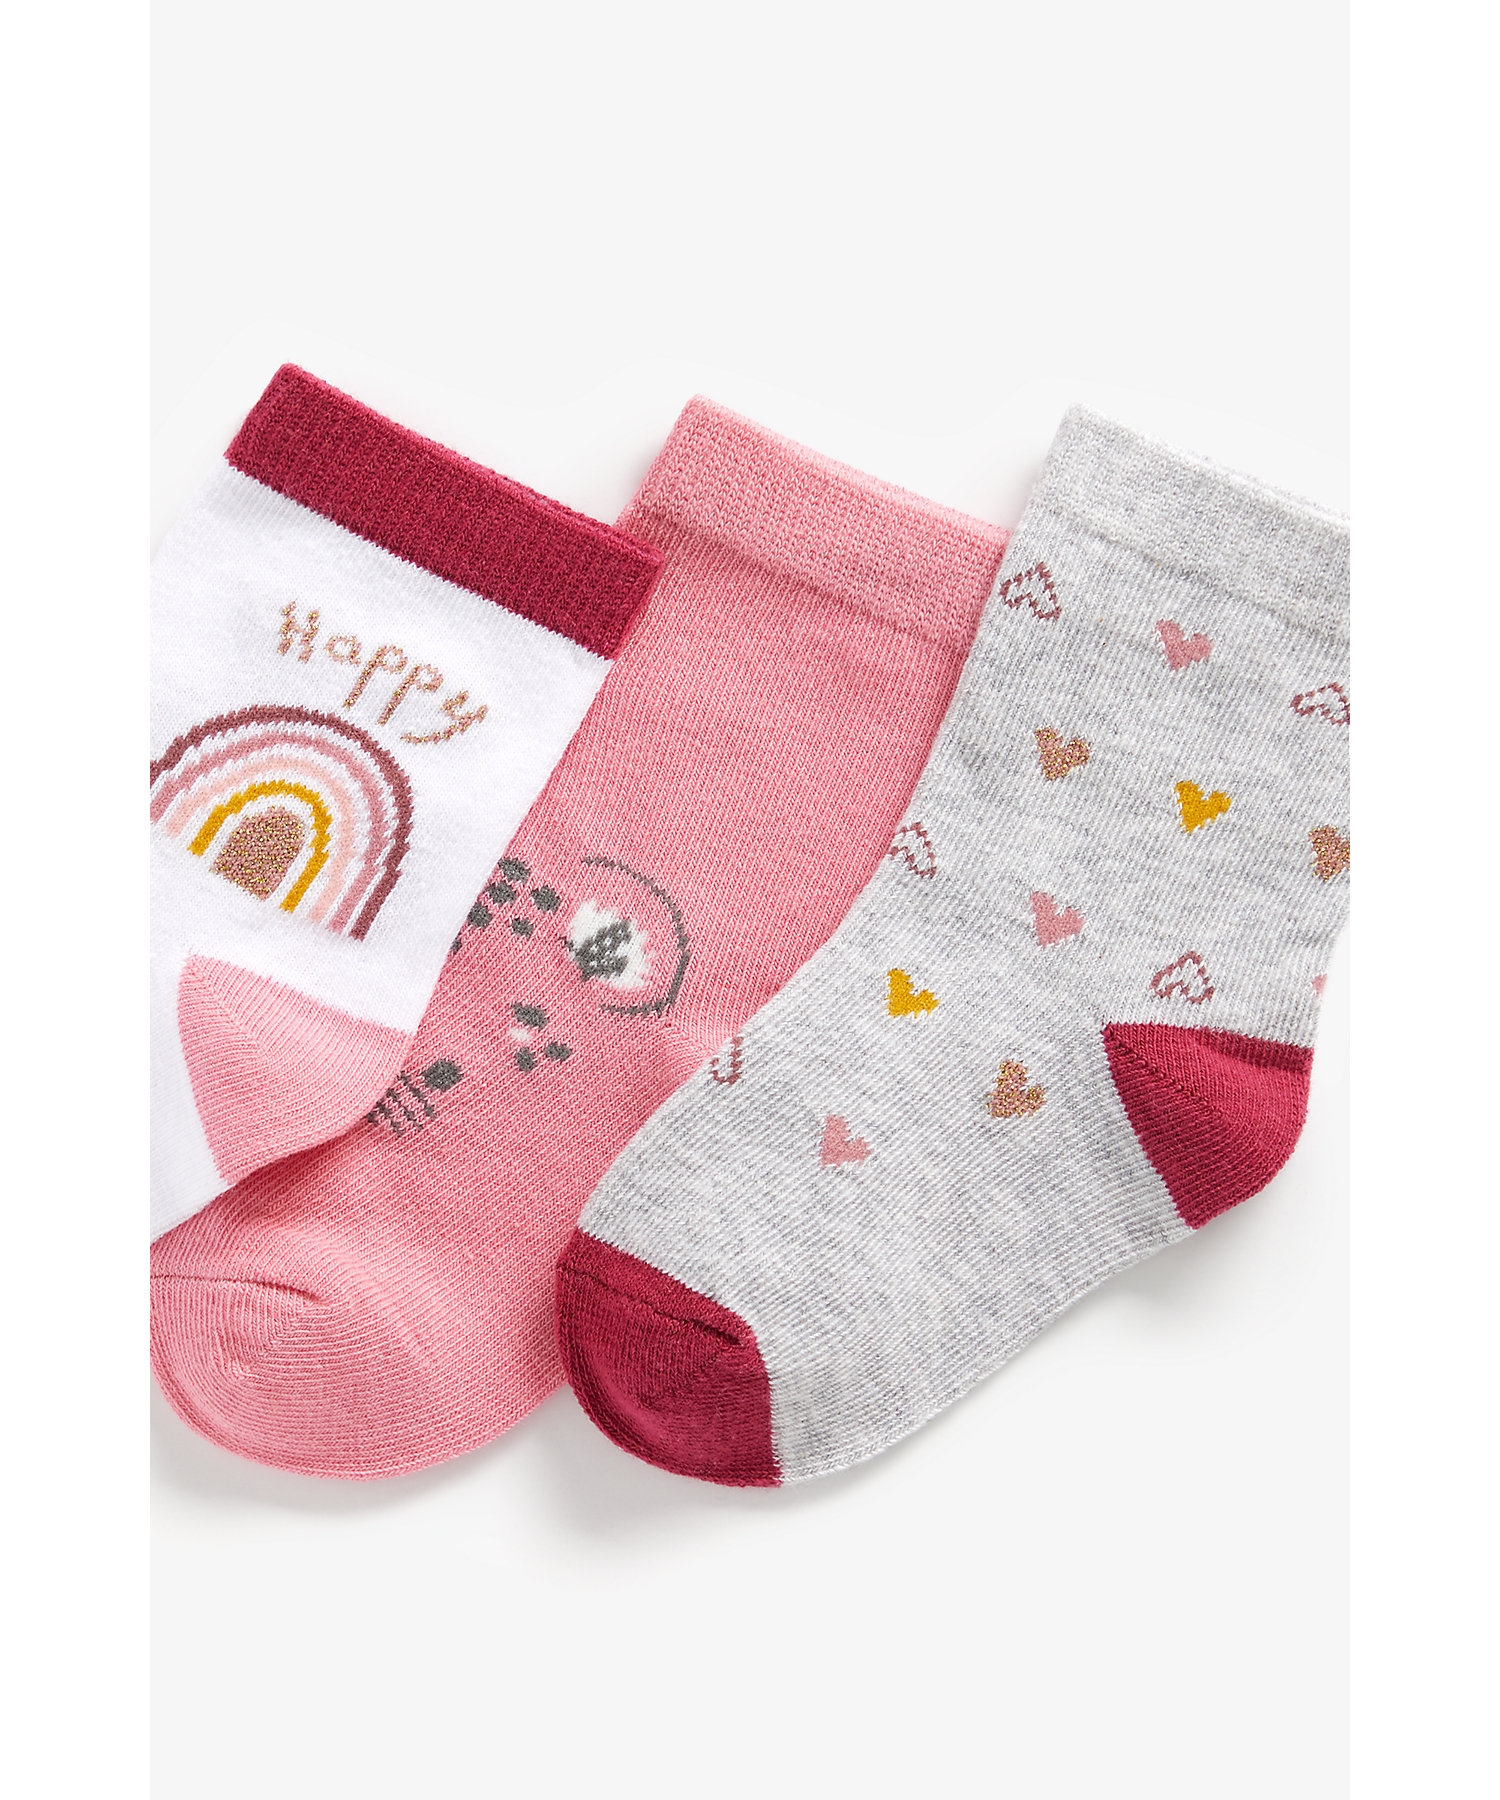 Mothercare | Girls Socks Rainbow And Heart Design - Pack Of 3 - Pink 1